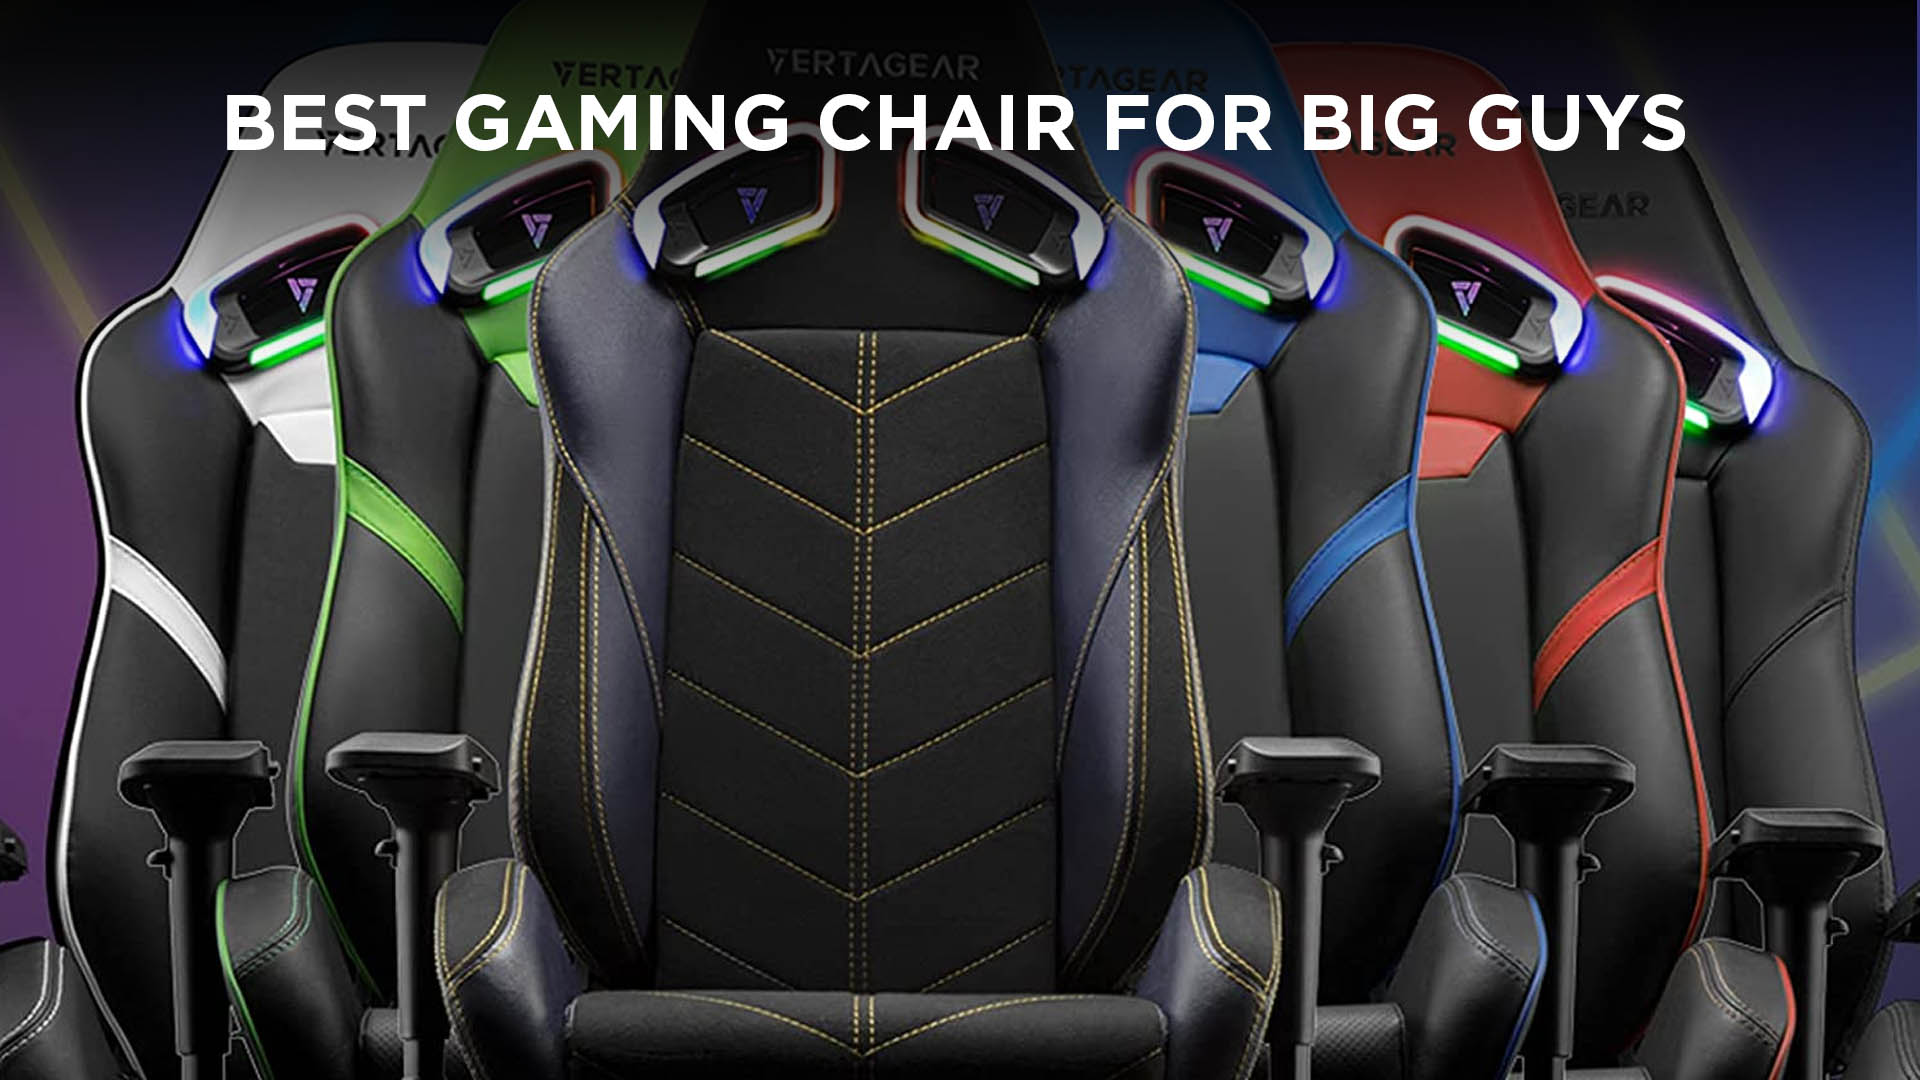 What Is the Best Gaming Chair for Big Guys